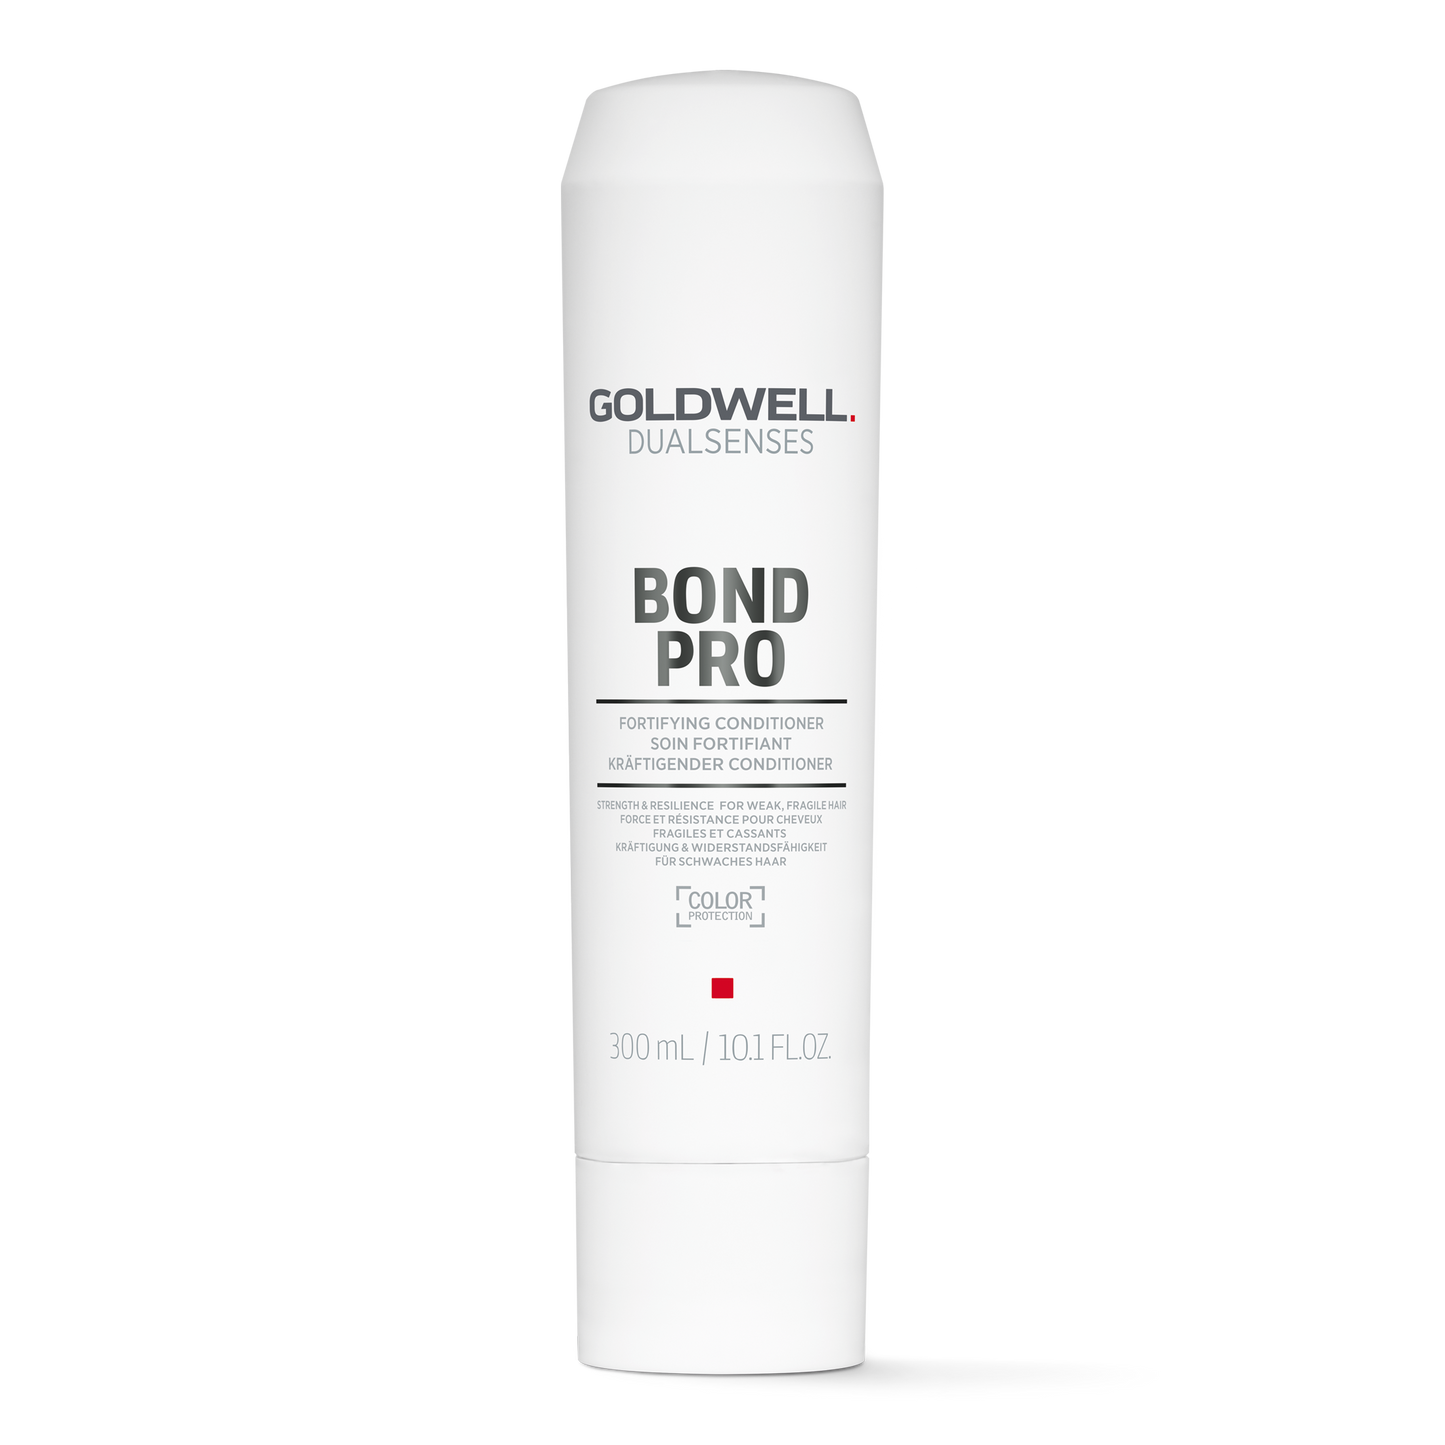 Dualsenses Bond Pro Fortifying Conditioner 300mL